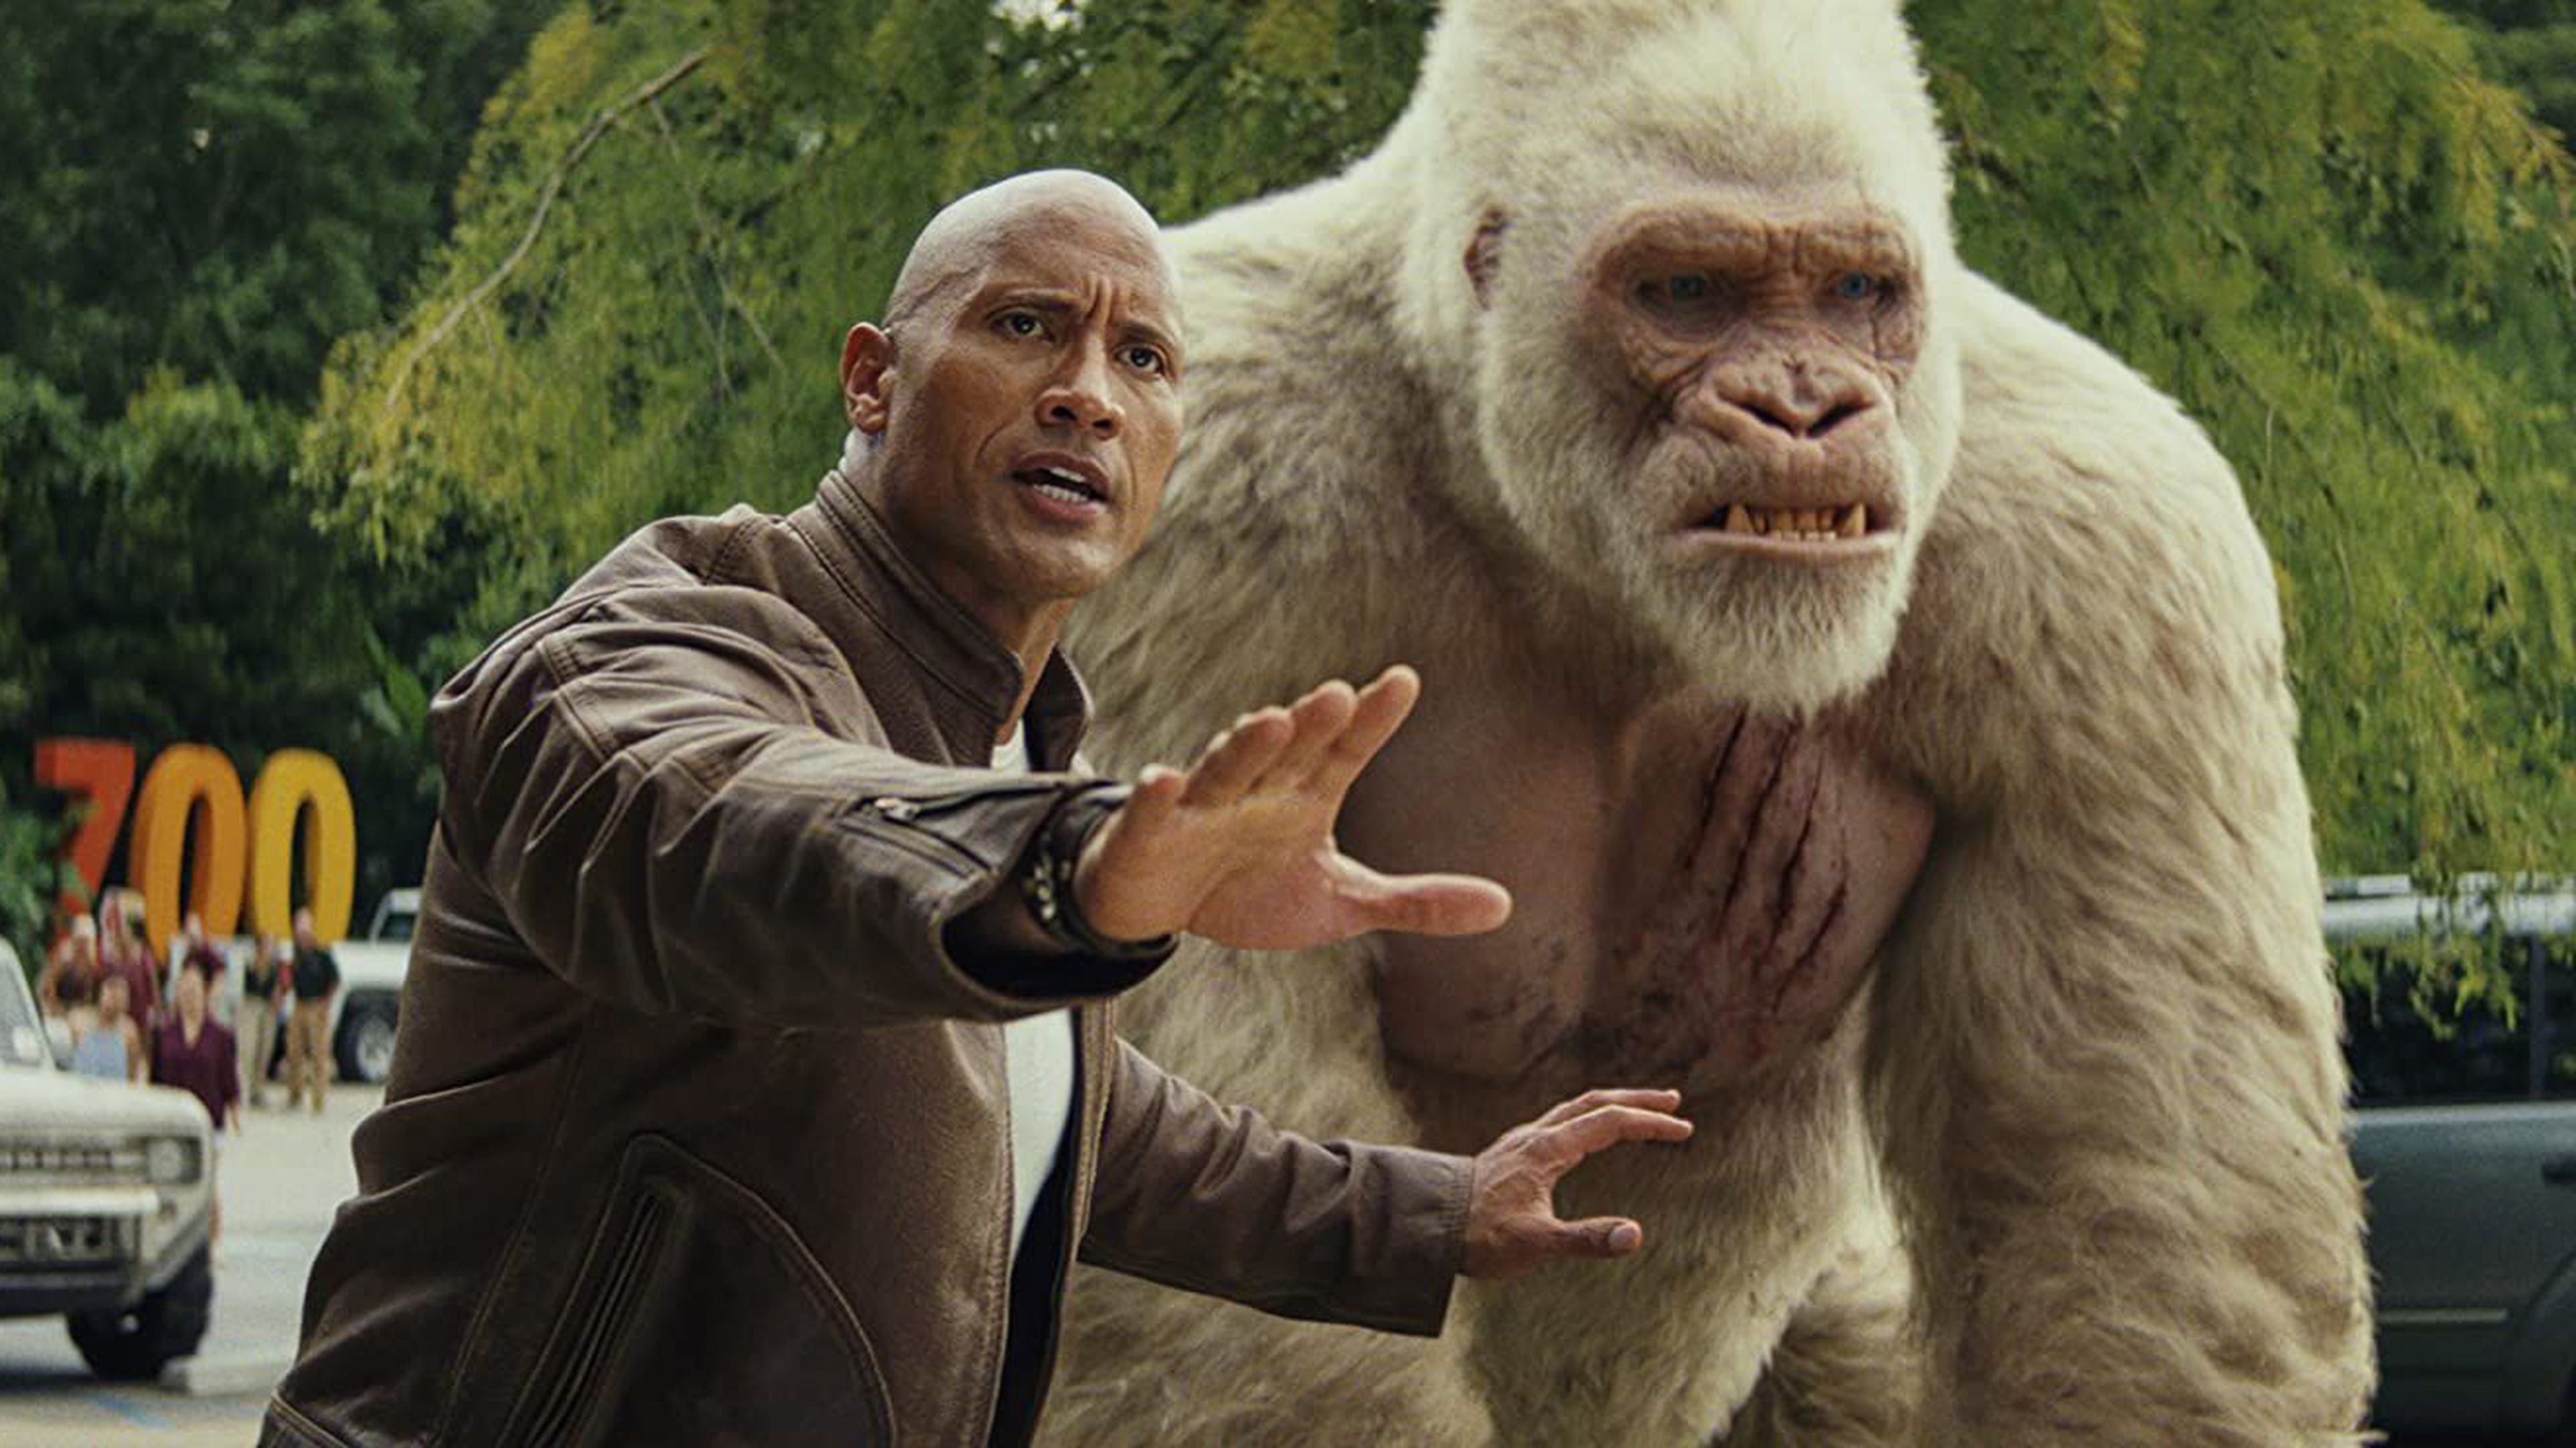 Proyecto Rampage (2018)